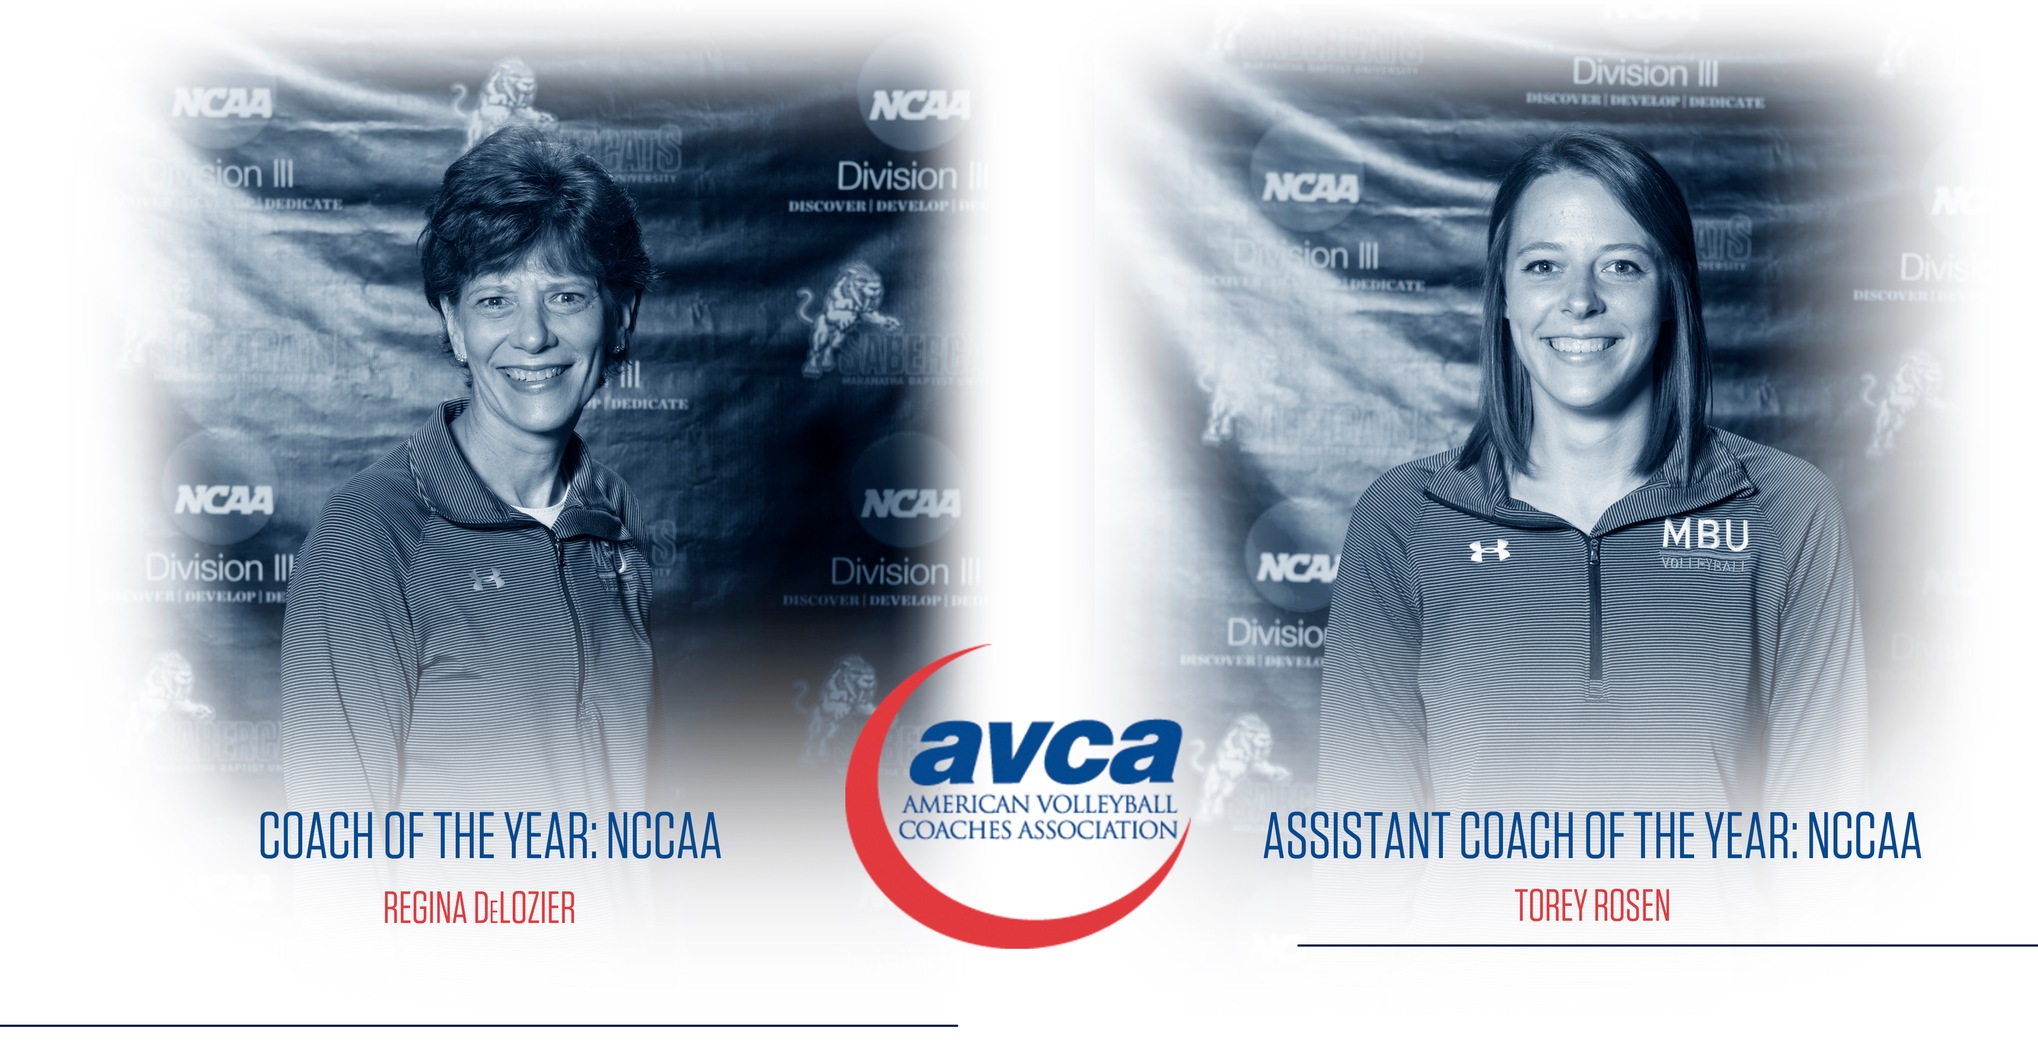 DeLozier, Rosen: Mother-Daughter Duo Tabbed as Coaches of the Year